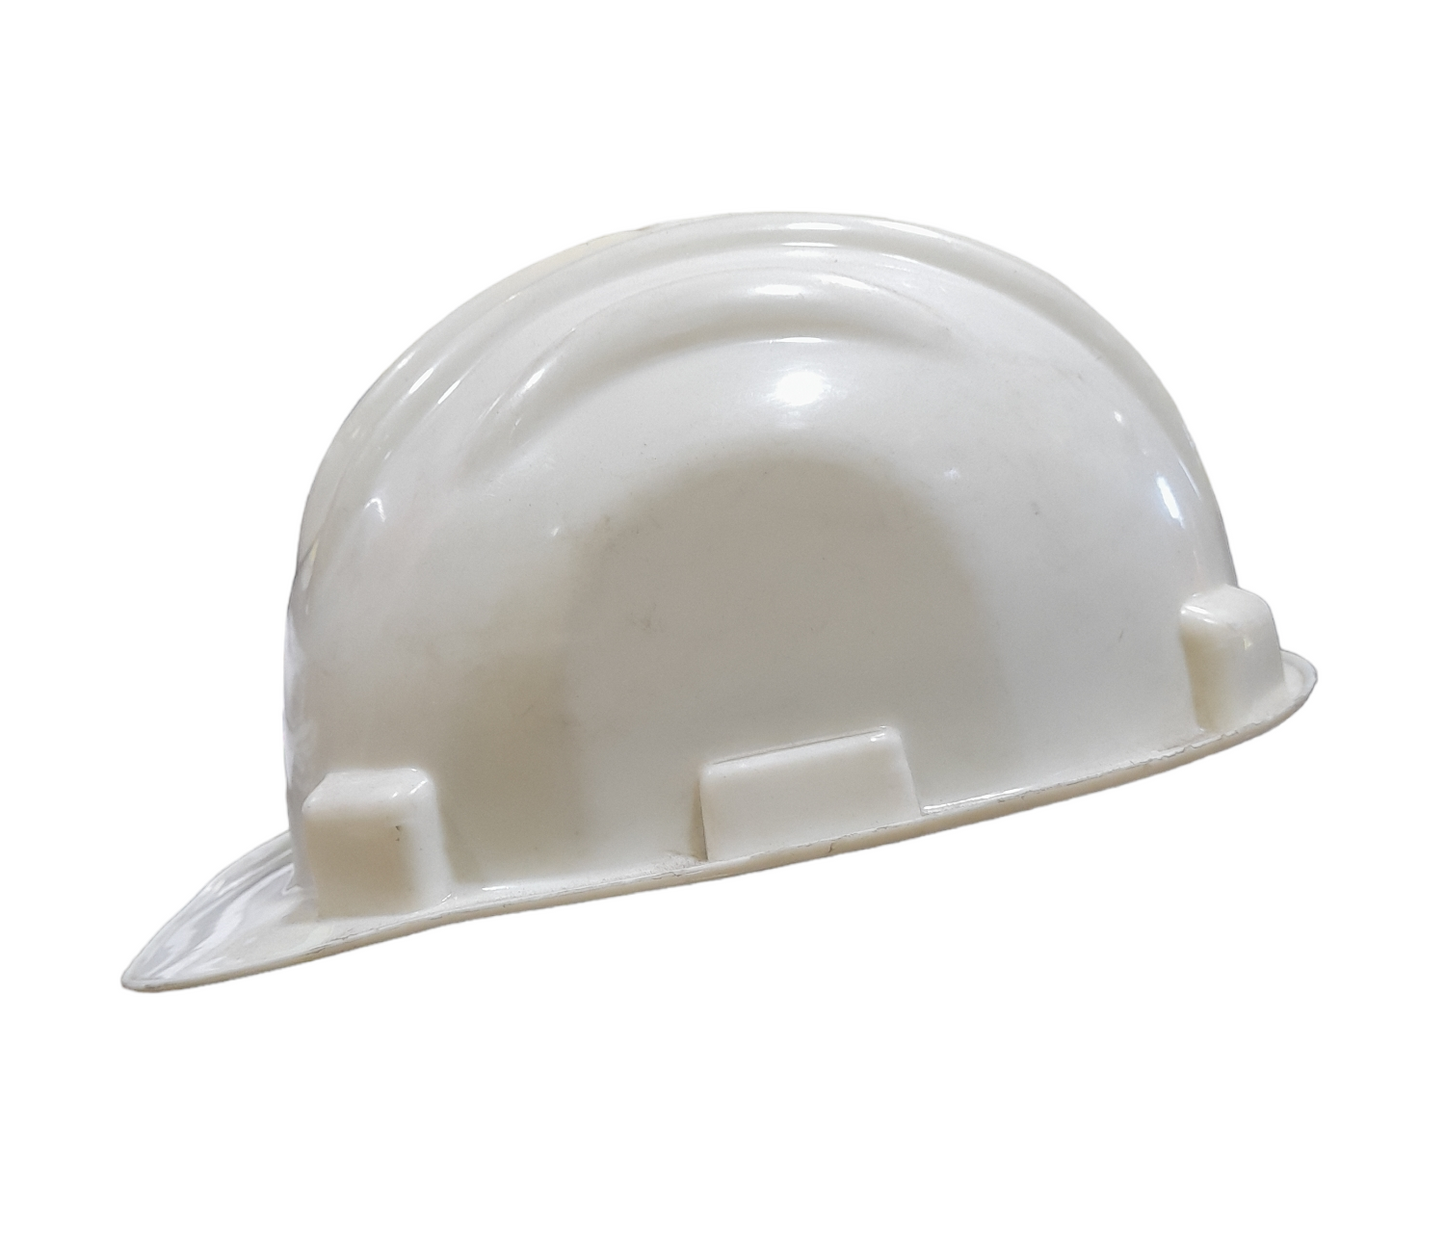 My Corp White Industrial Safety Helmet